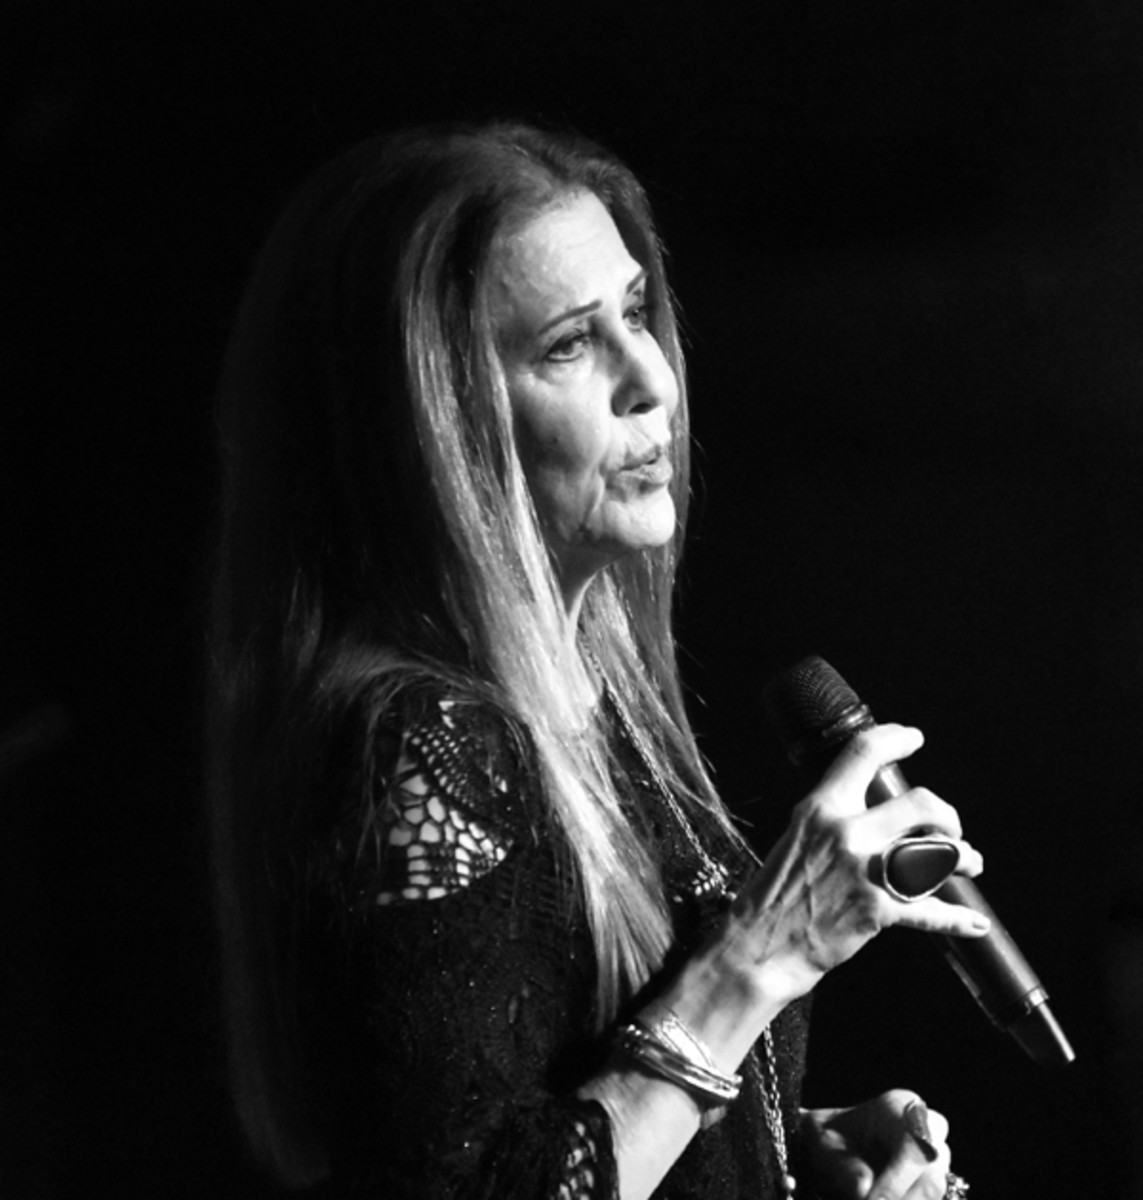 Rita Coolidge performing at New York’s Cutting Room on June 23, 2016. Photo by Chris M. Junior.